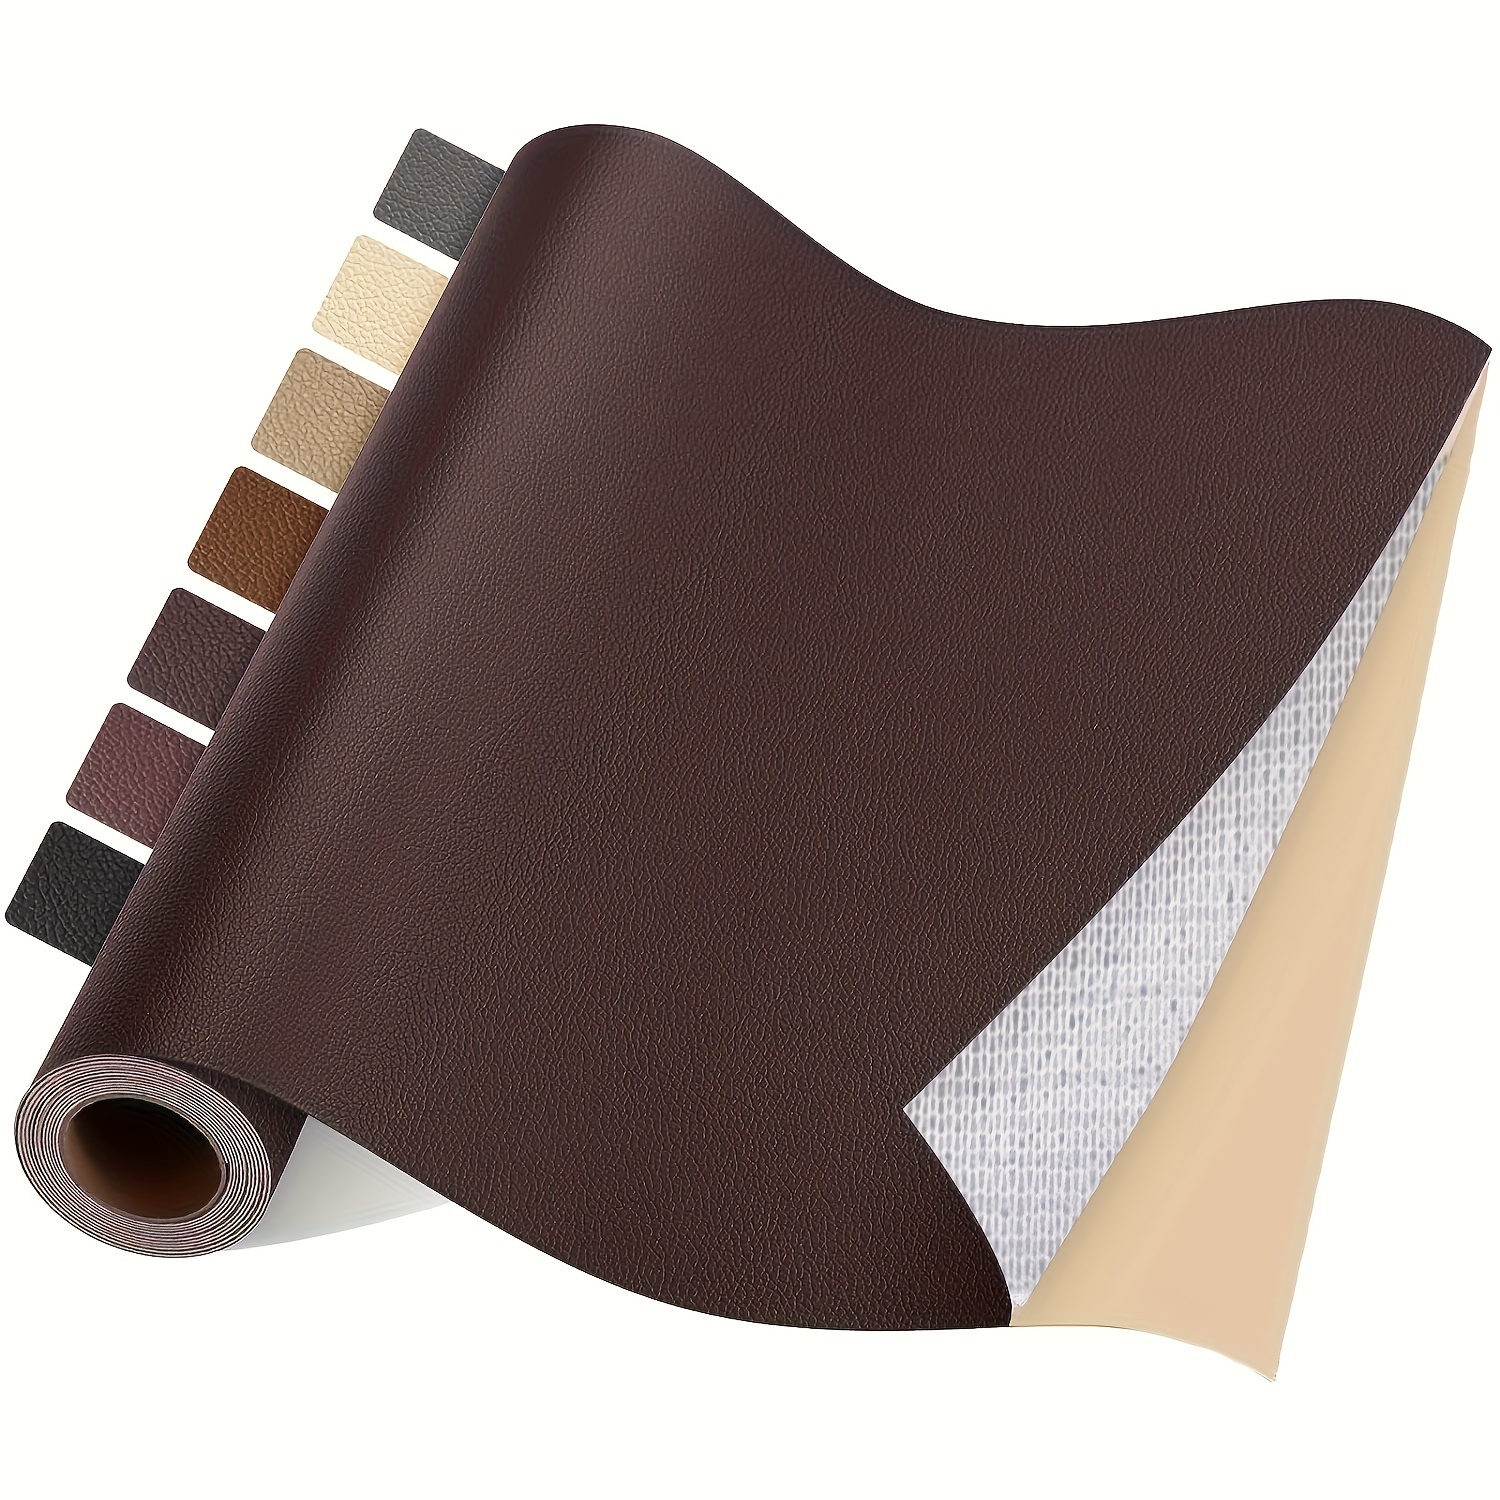 Large Leather Repair Patch Self Adhesive,16×63 inch Large Leather Tape for  Furniture,Leather and Vinyl Repair Patch Kit for Furniture,Recliner,Boot,  Office Chair,Couch,Upholstery - Dark Brown - Coupon Codes, Promo Codes,  Daily Deals, Save